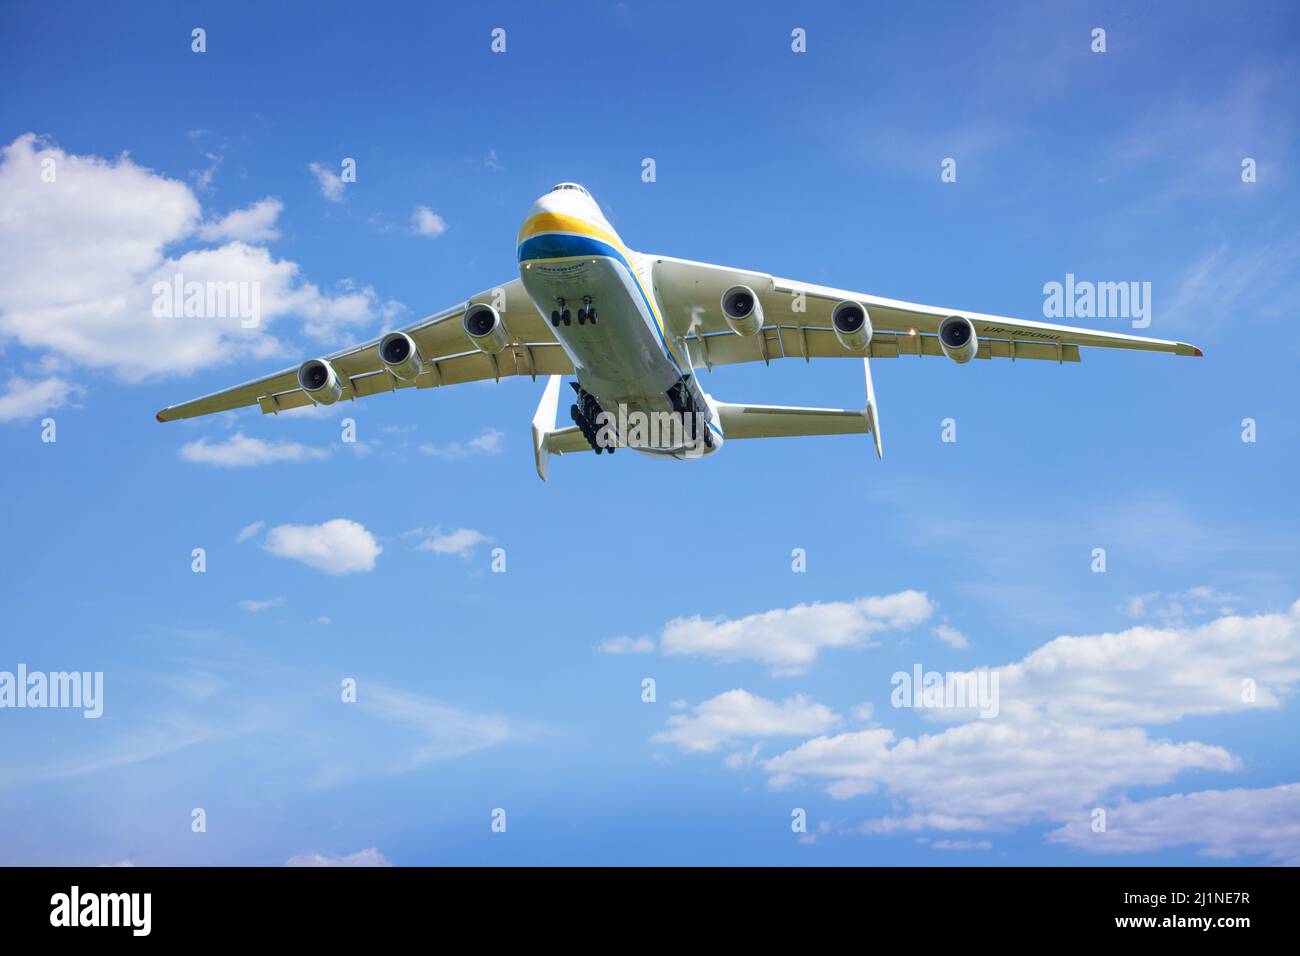 The plane Antonov 225 AN-225 Mriya fly, the biggest airplane in the world taking off from the airport. UR-82060 largest aircraft flying in the sky. Ukraine, Hostomel - August 18, 2021. Stock Photo